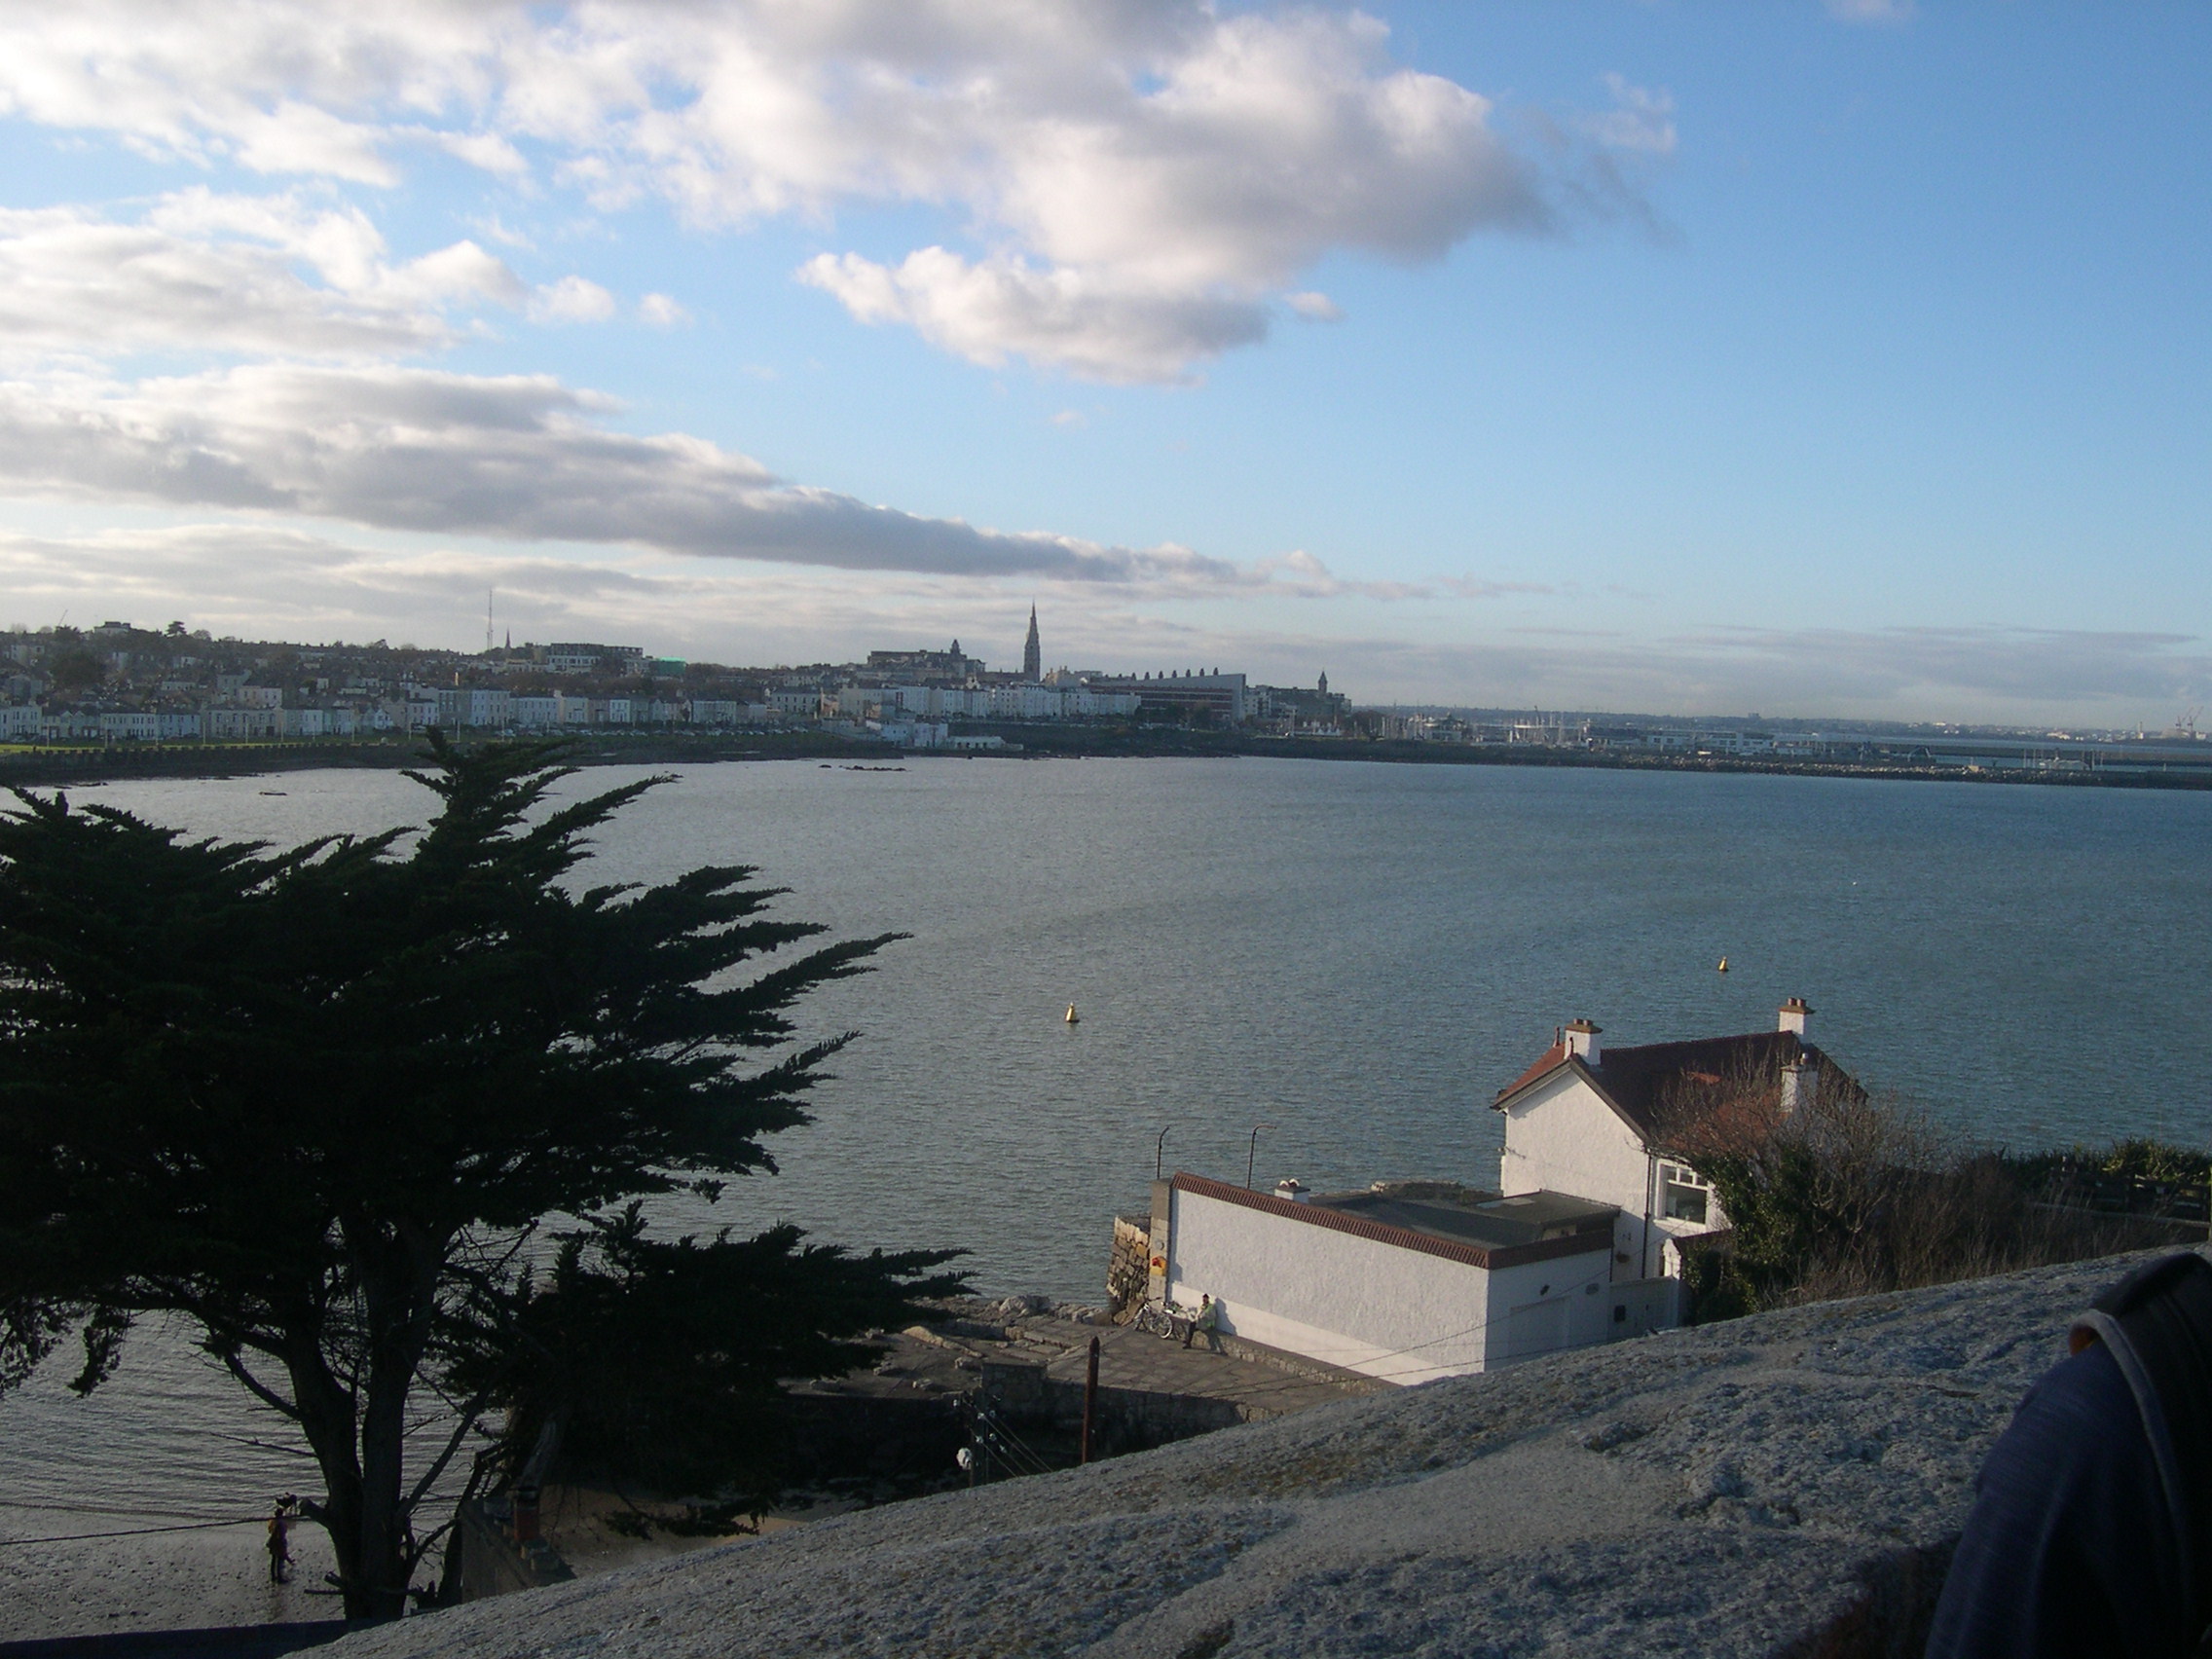 Dun Laoghaire harbor from the Joyce Tower!